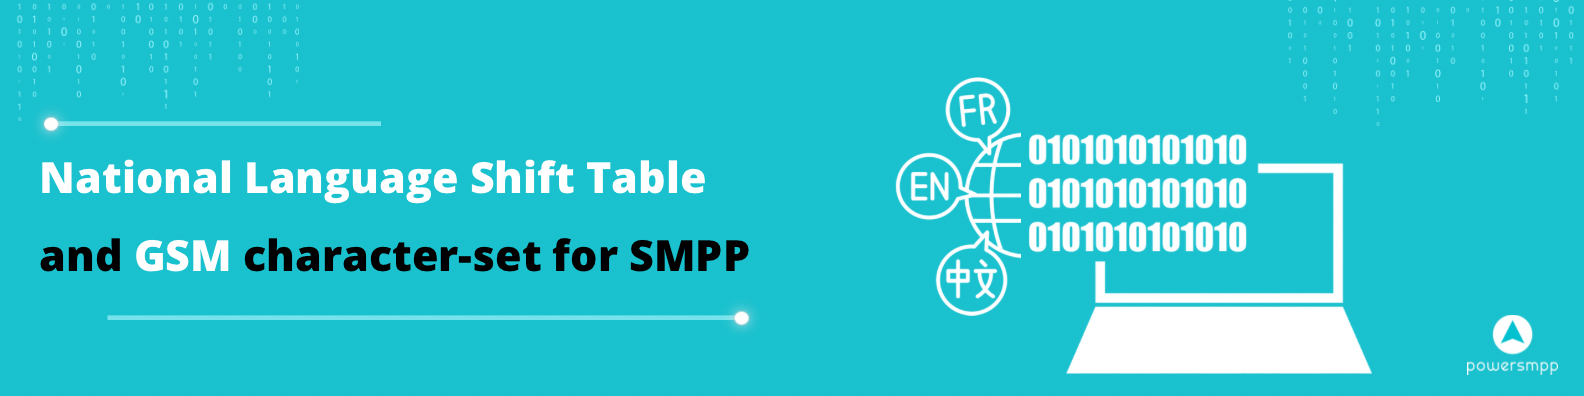 National Language Shift Table and GSM character set for SMPP